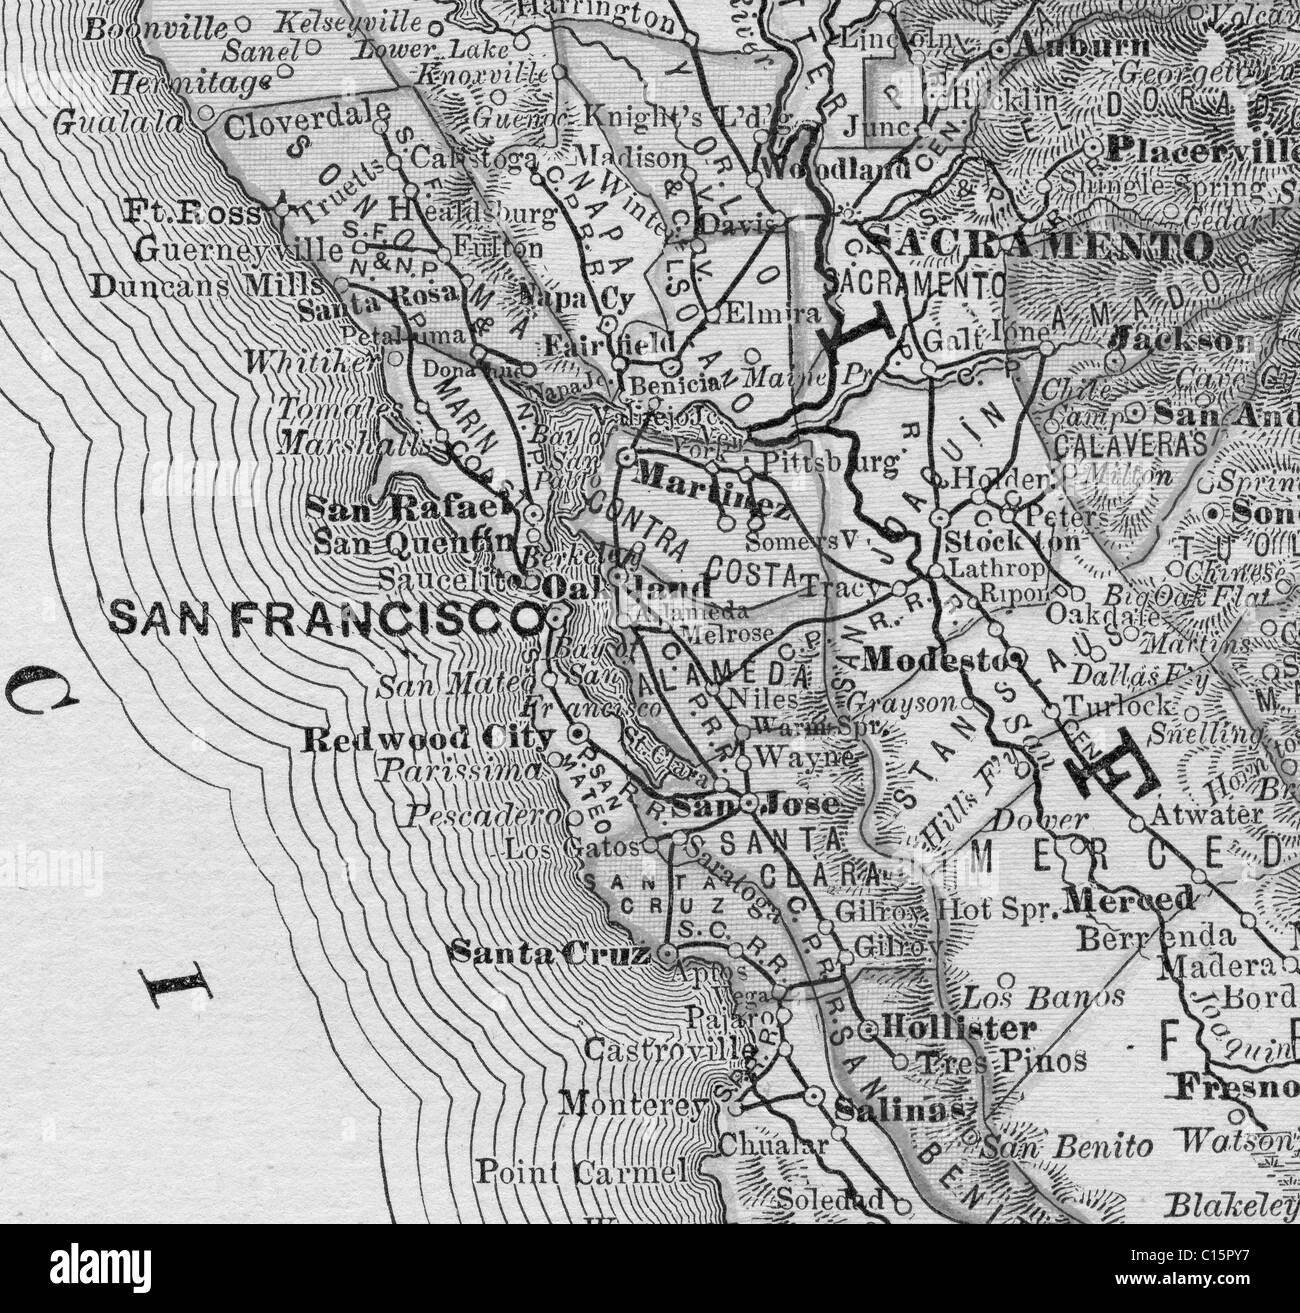 Old map of San Francisco from original geography textbook, 1884 Stock Photo